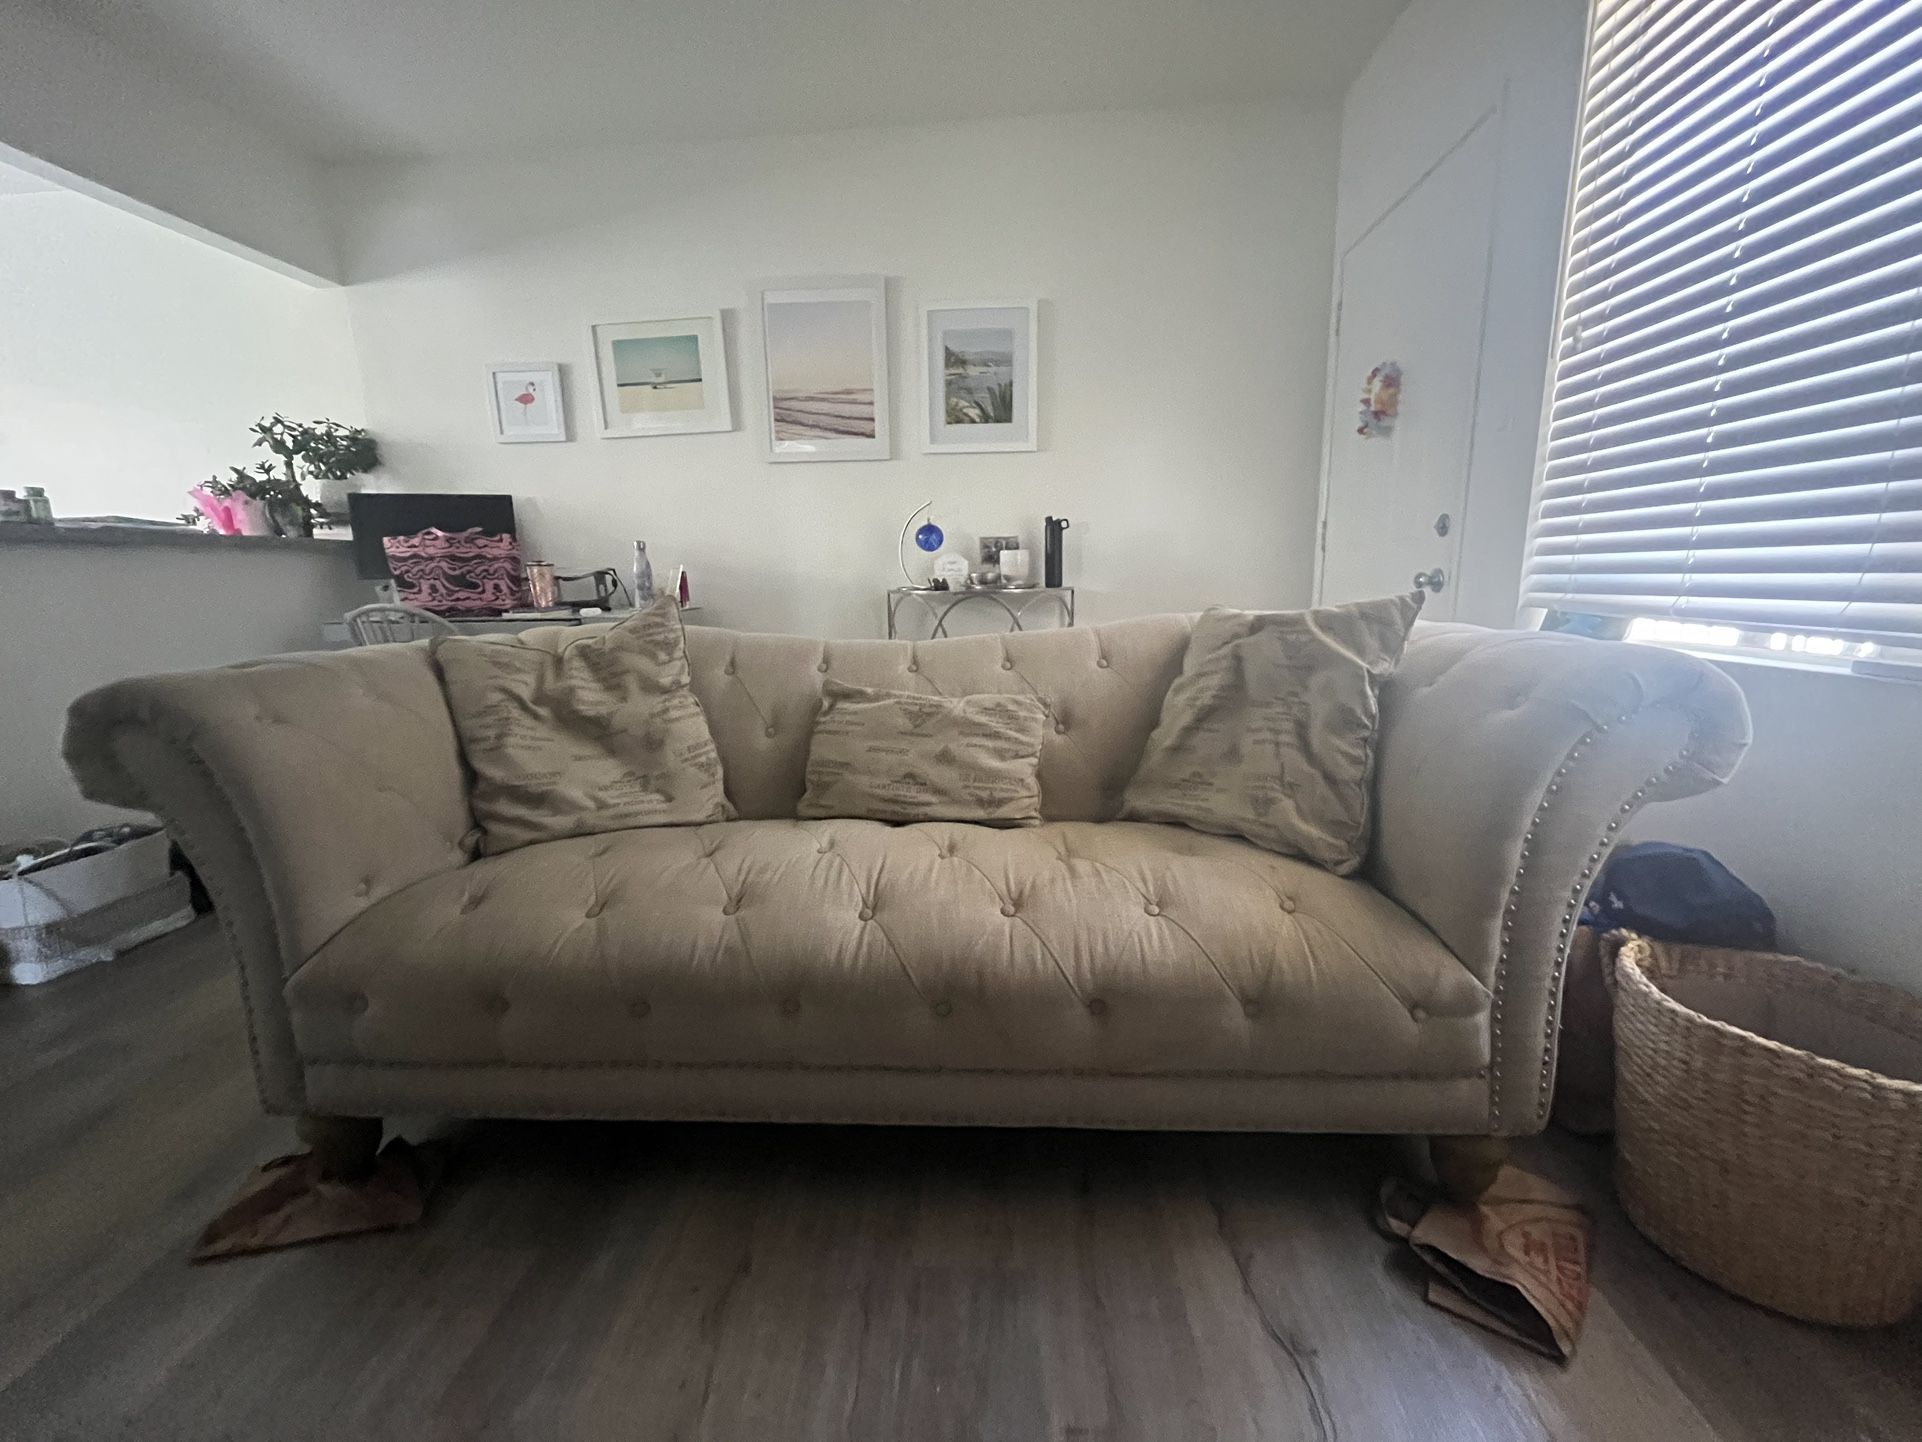 Tufted Barreled Bucket Couch W/ Accent Pillows 